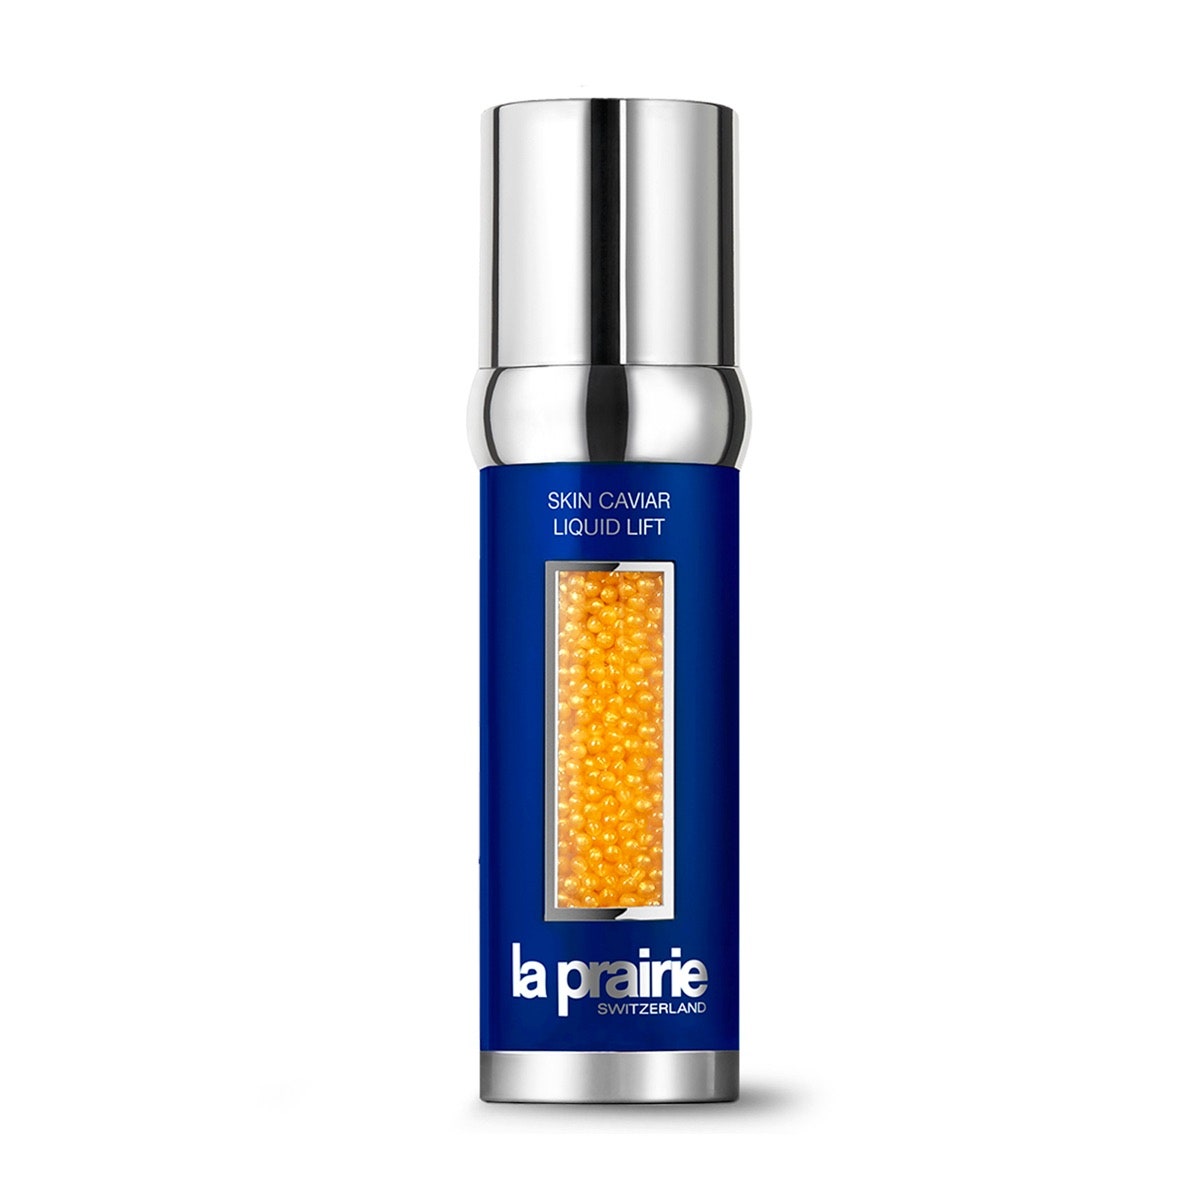 A blue and silver serum bottle with orange beads inside